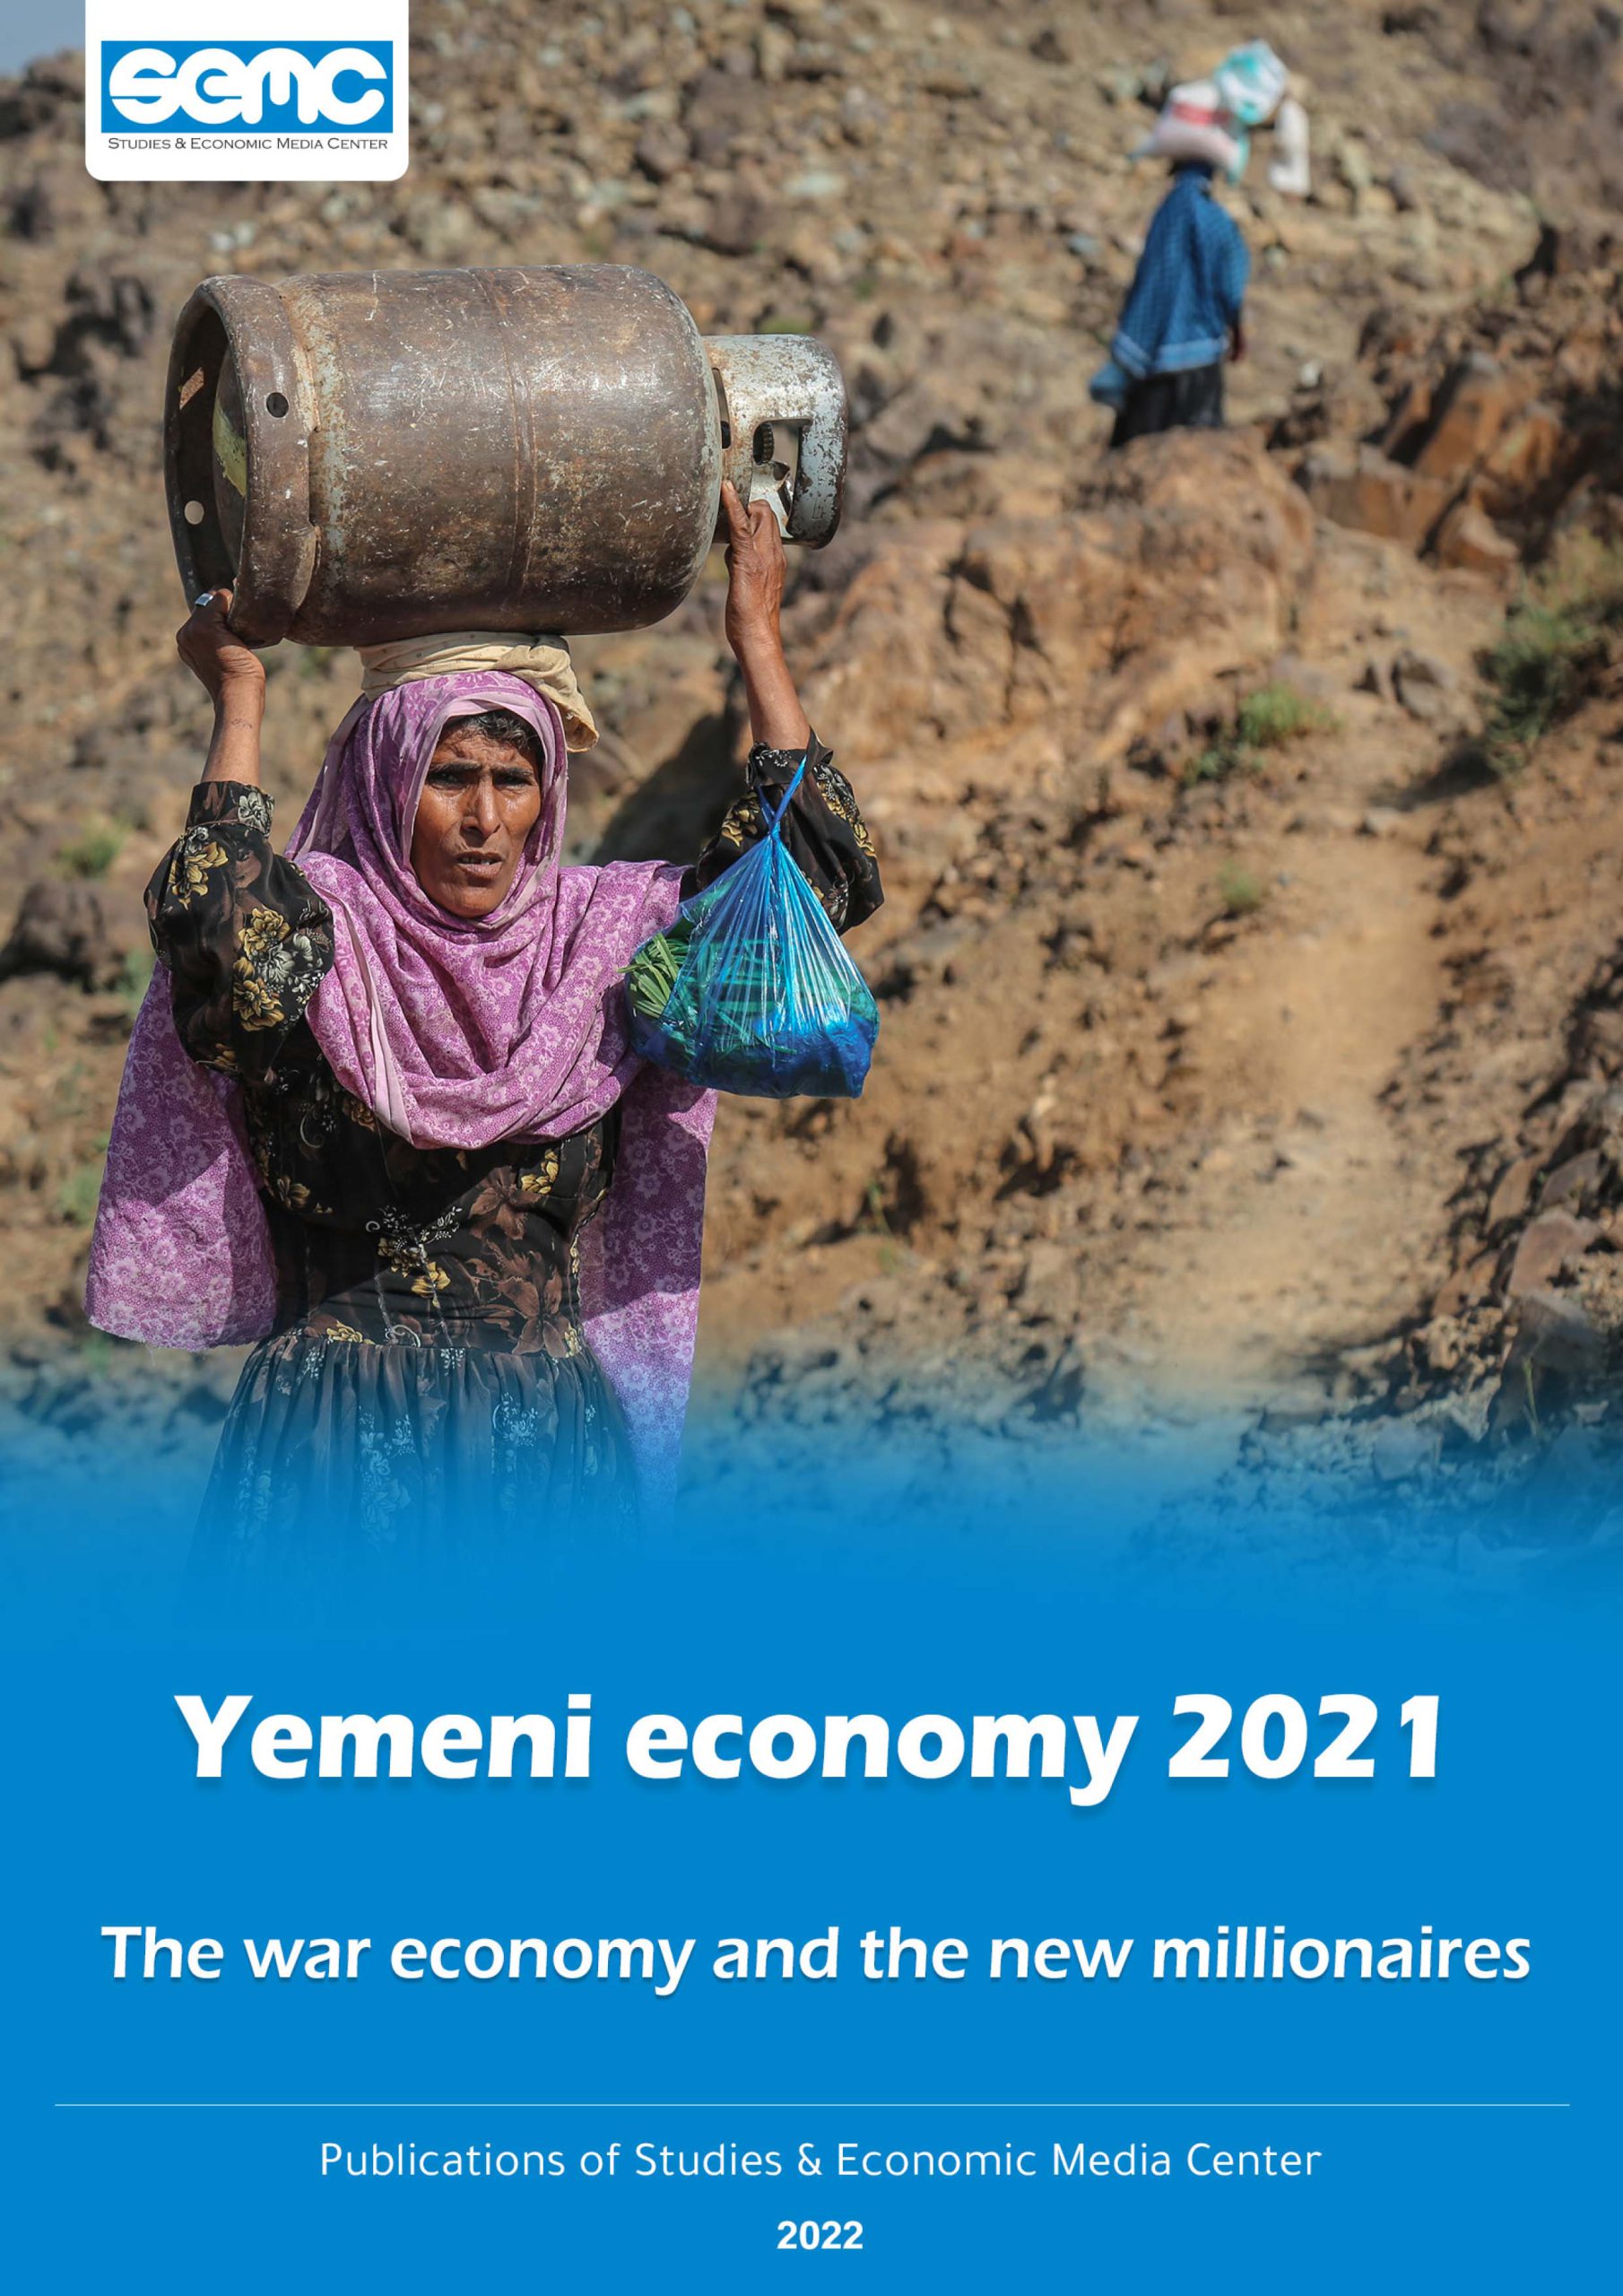 An economic report on the war economy and new millionaires in Yemen